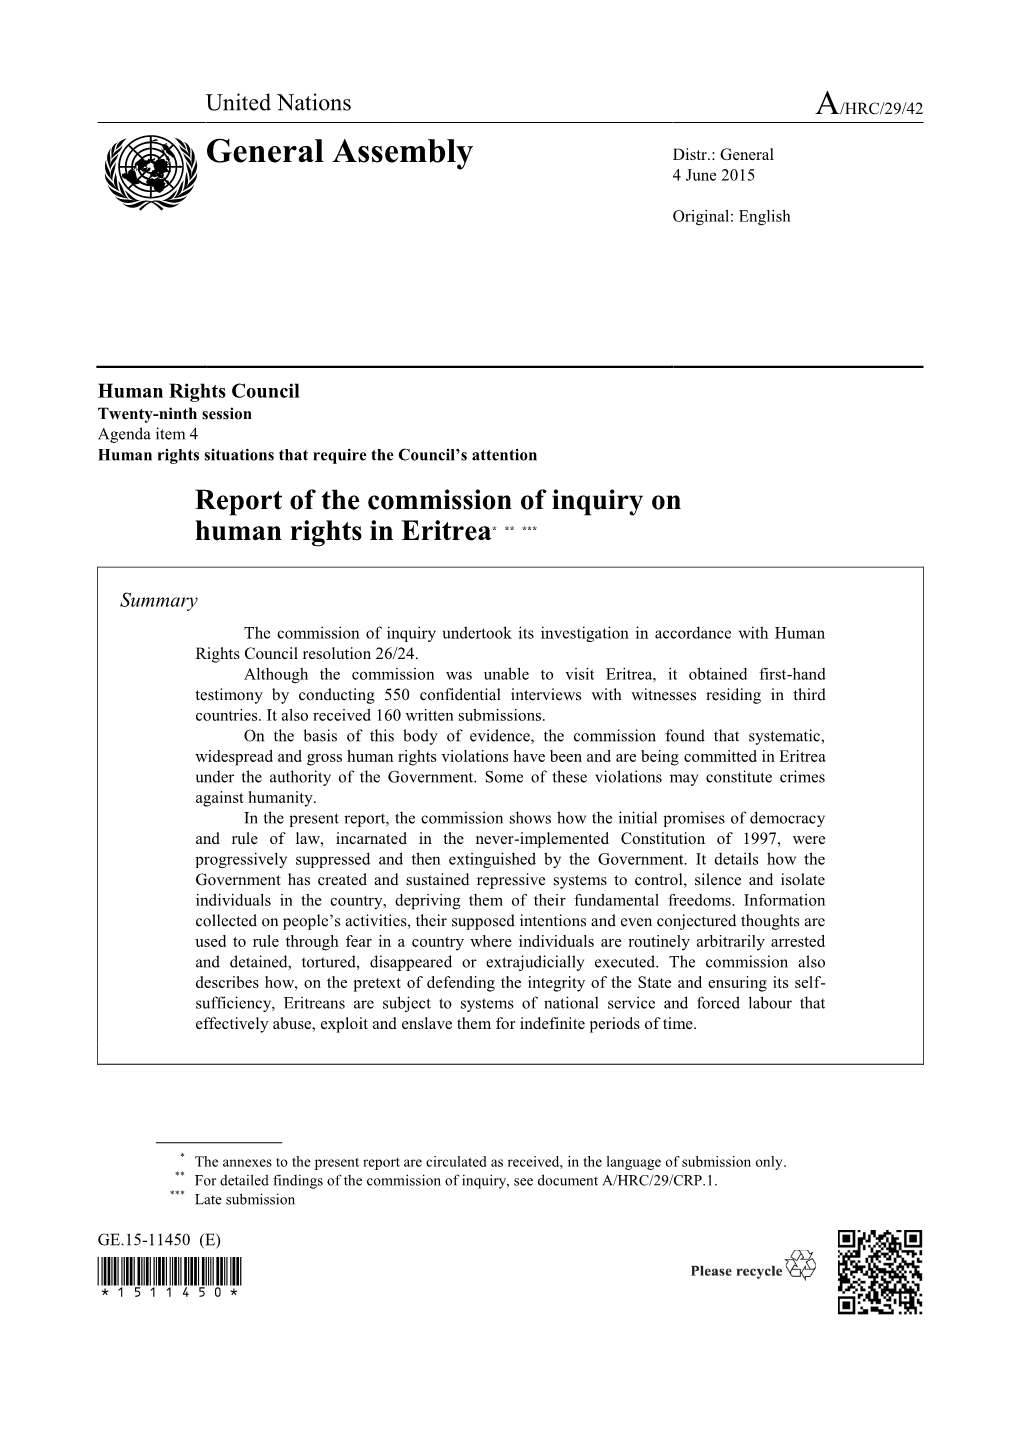 Report of the Commission of Inquiry on Human Rights in Eritrea* ** ***